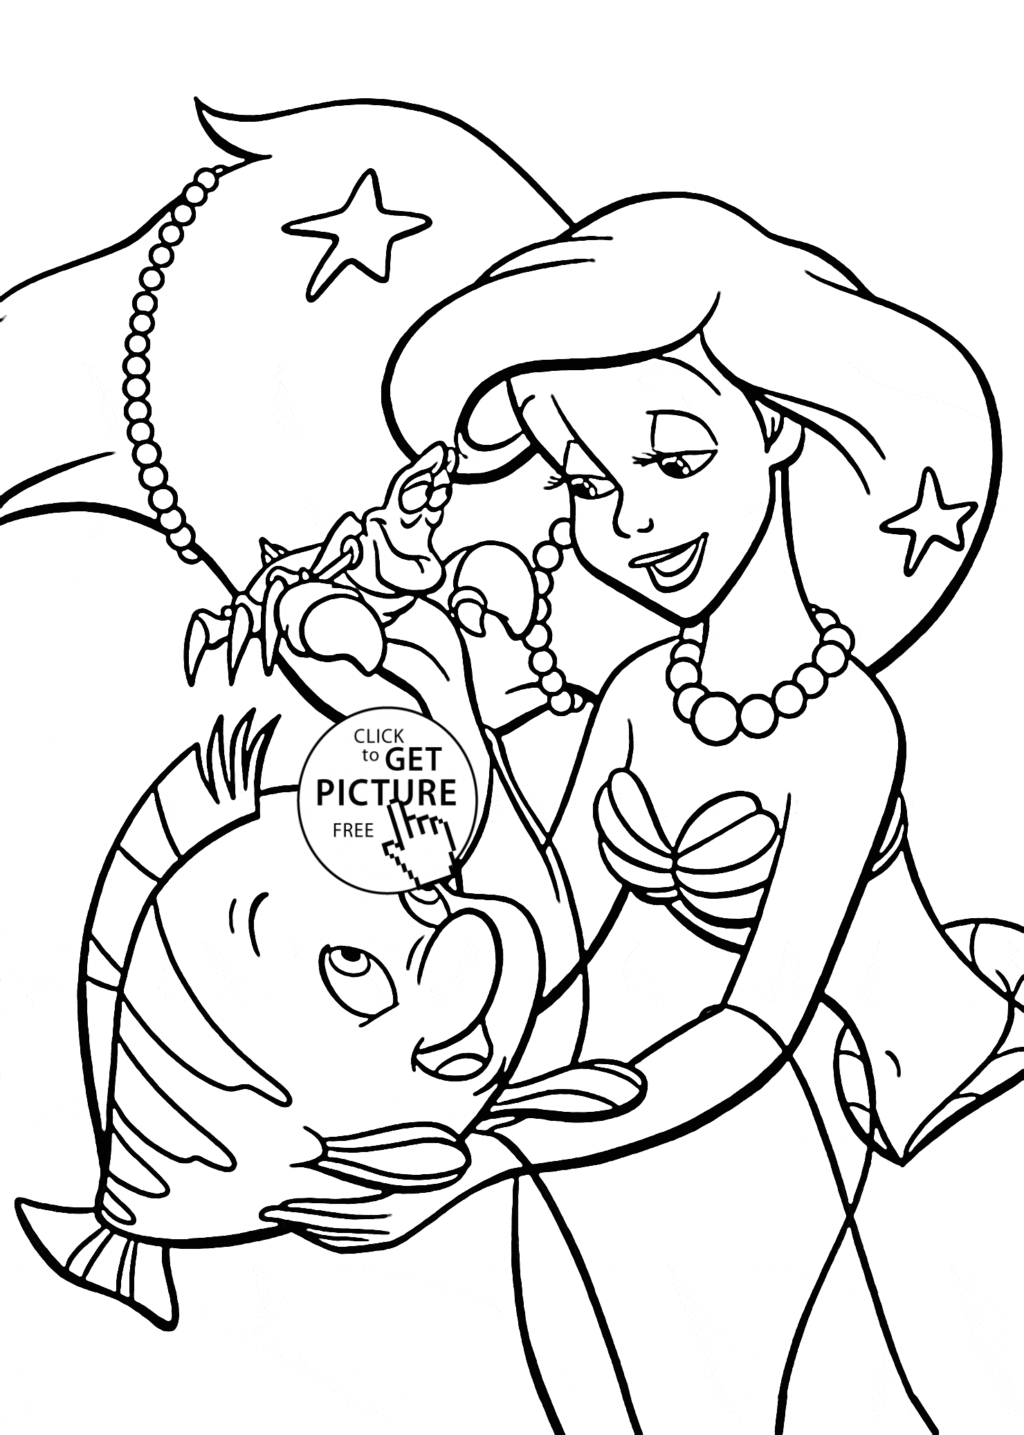 Free Ariel Coloring Pages Coloring Pages Mermaid Coloring Pages Free Printable Unicorn